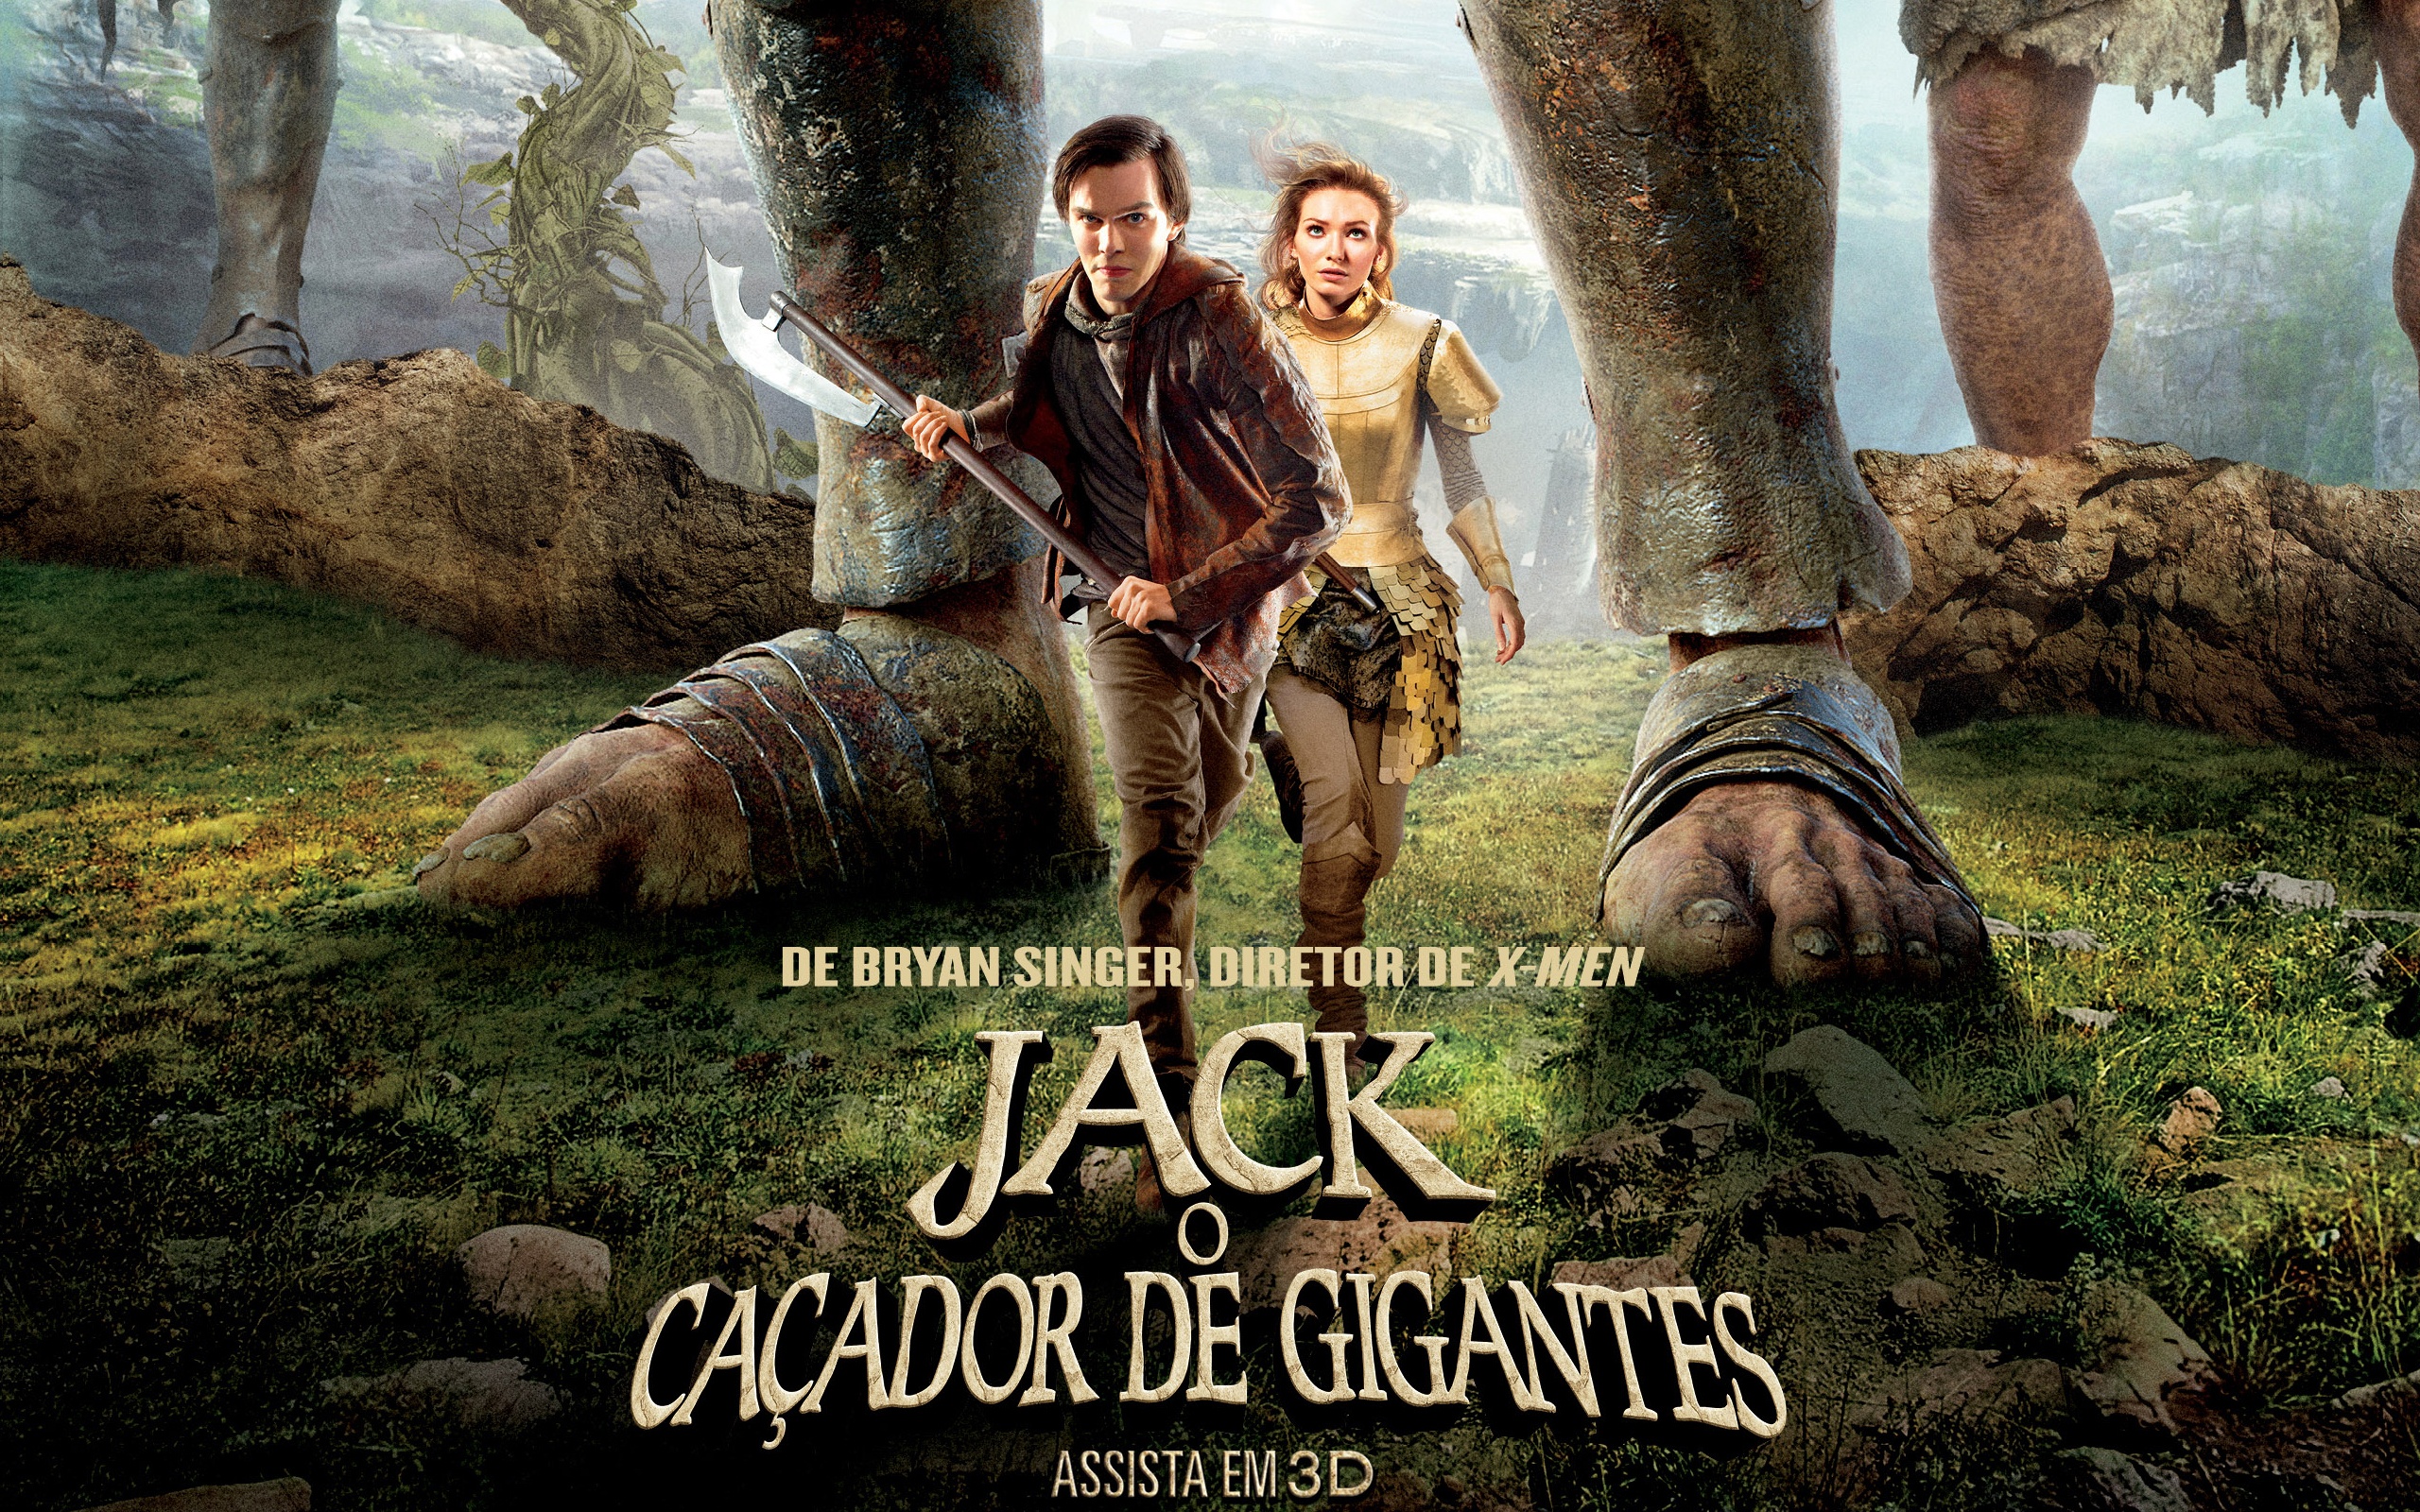 Jack The Giant Slayer Pics, Movie Collection